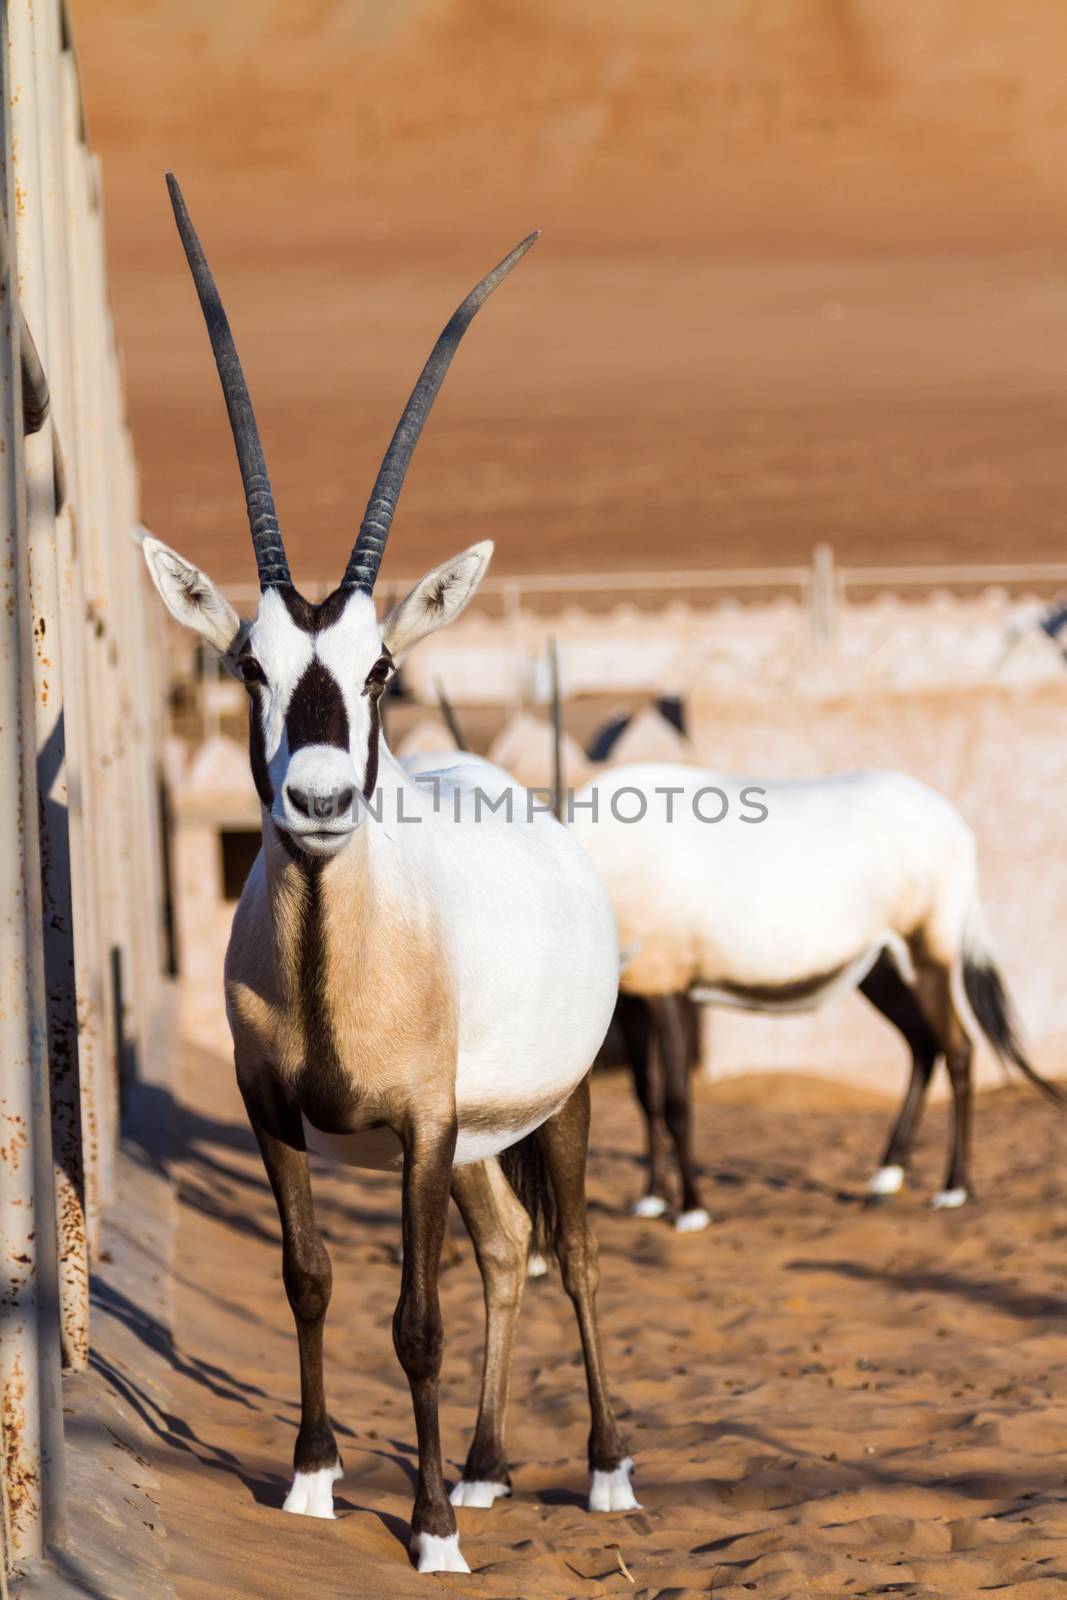 Large antelopes with spectacular horns, Gemsbok, Oryx gazella, being bred in captivity in Oman desert. by kasto